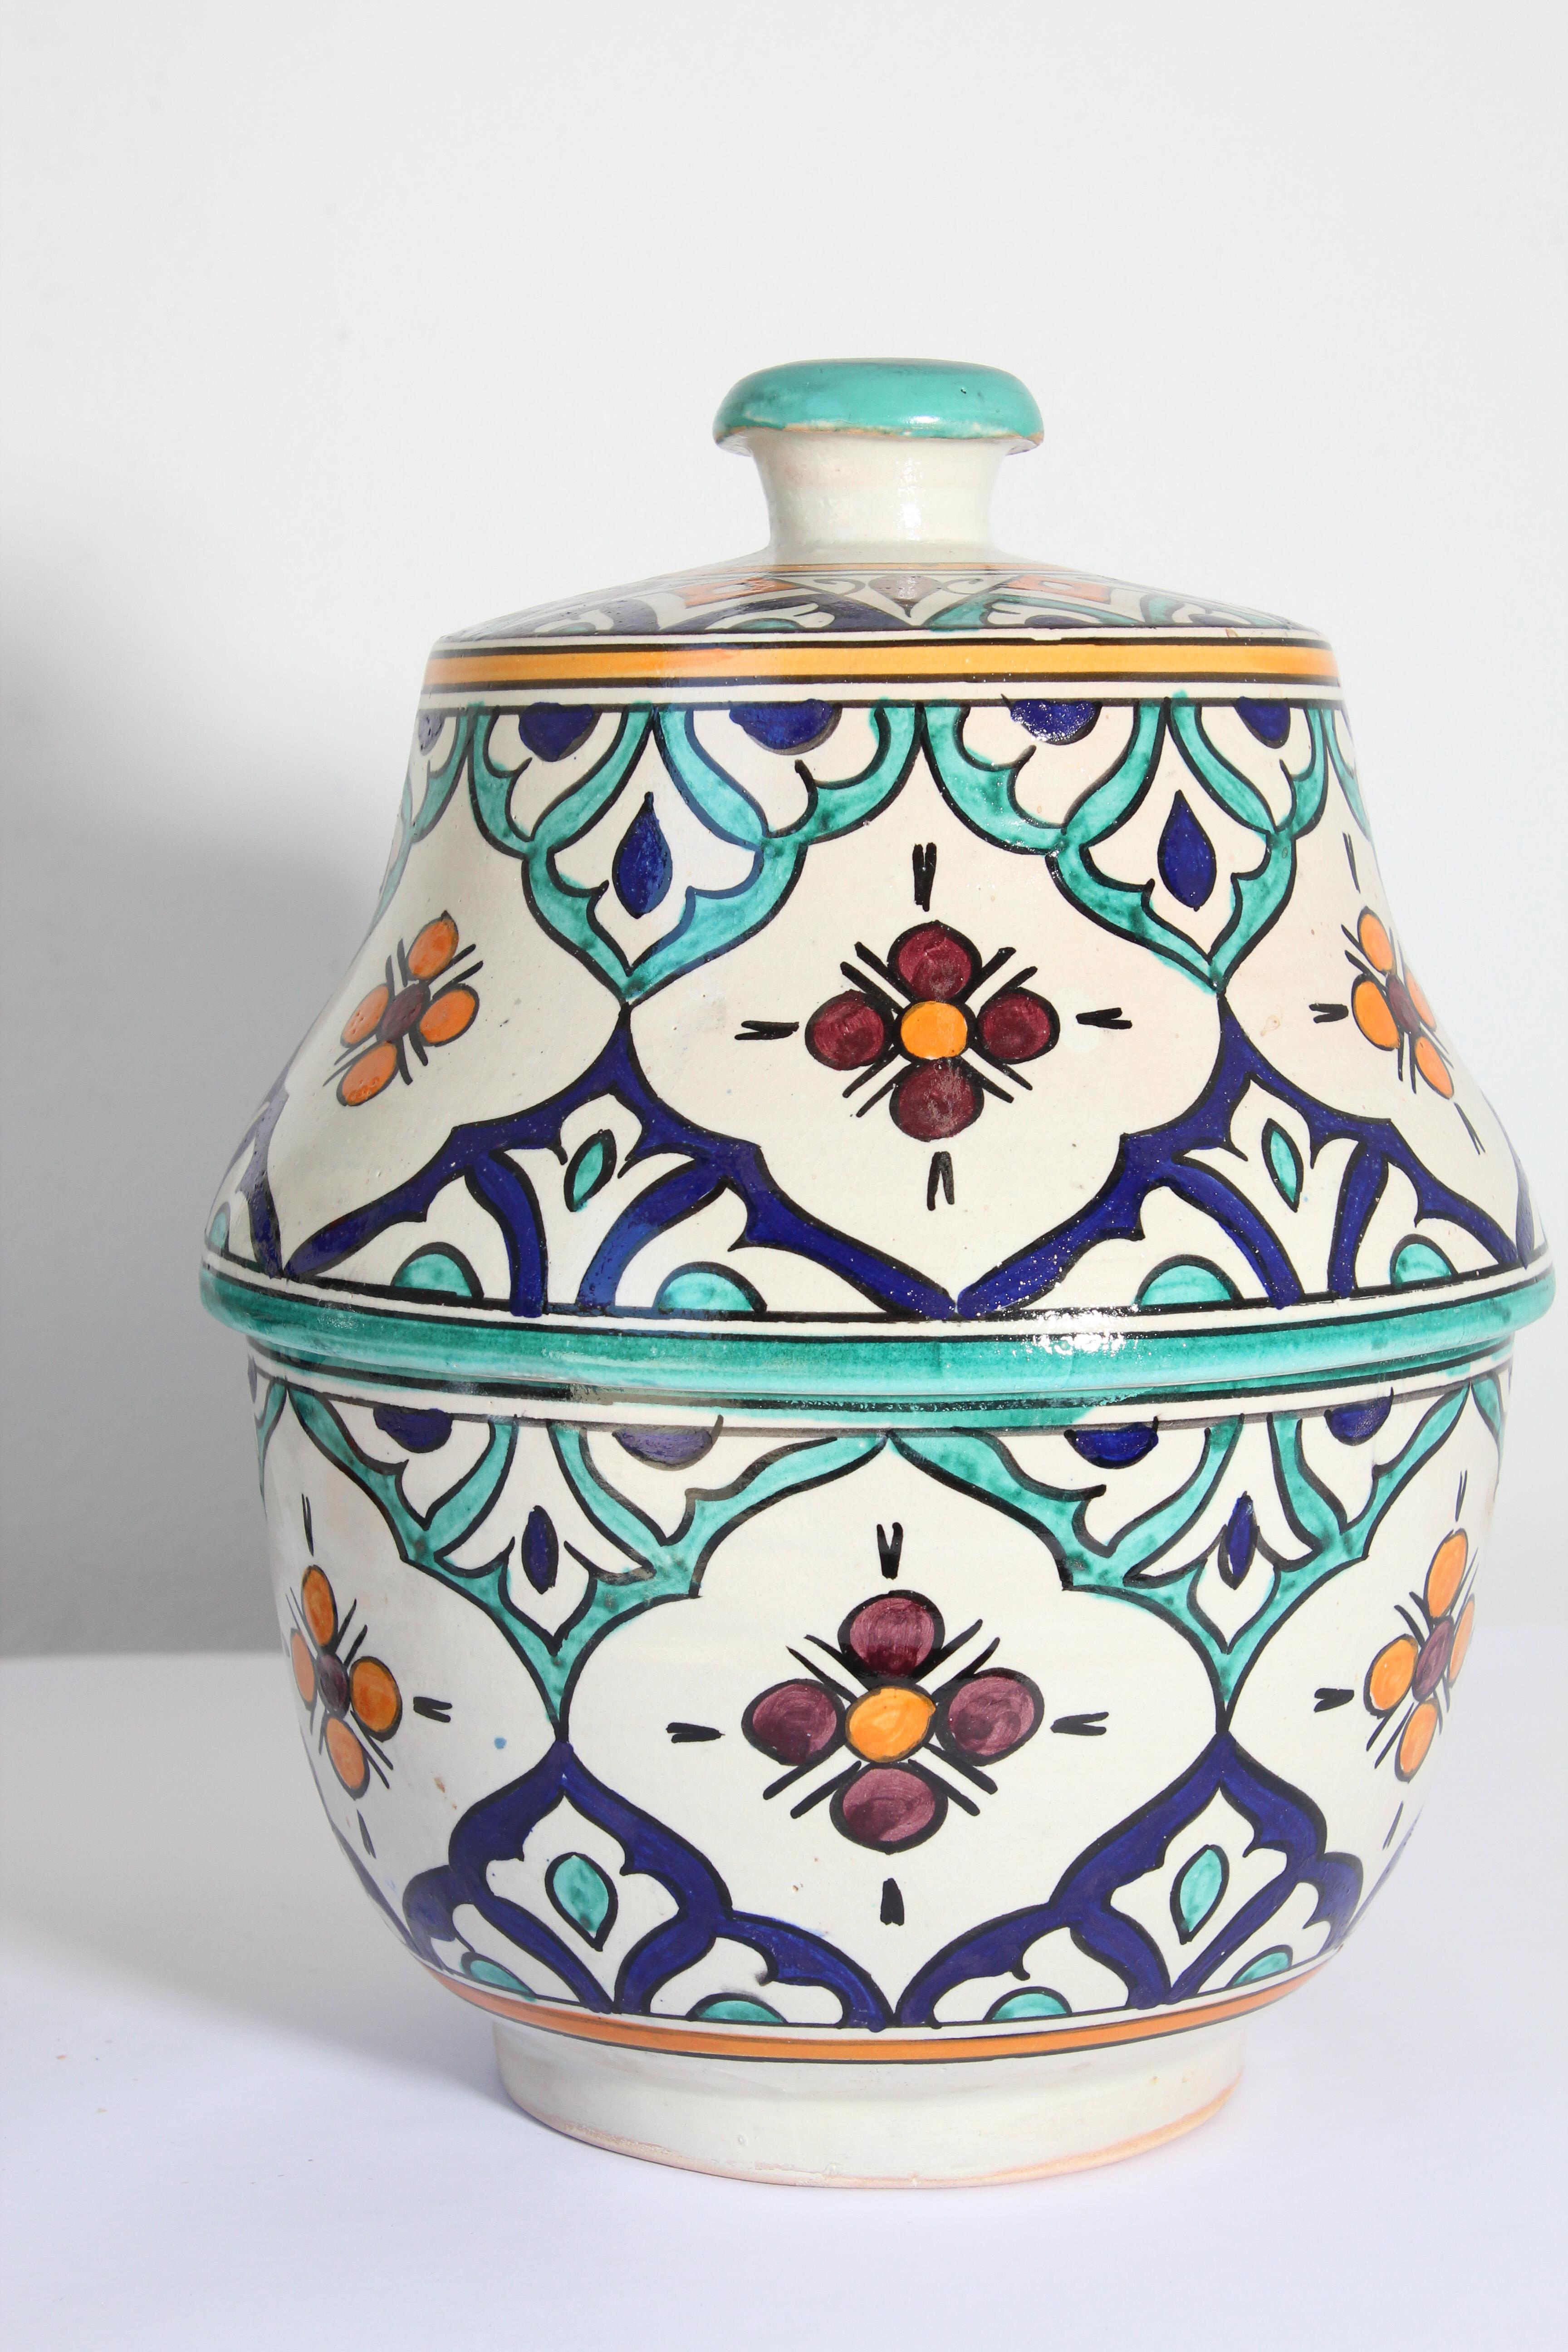 Moorish Ceramic Glazed Covered Urns Handcrafted in Fez Morocco For Sale 1